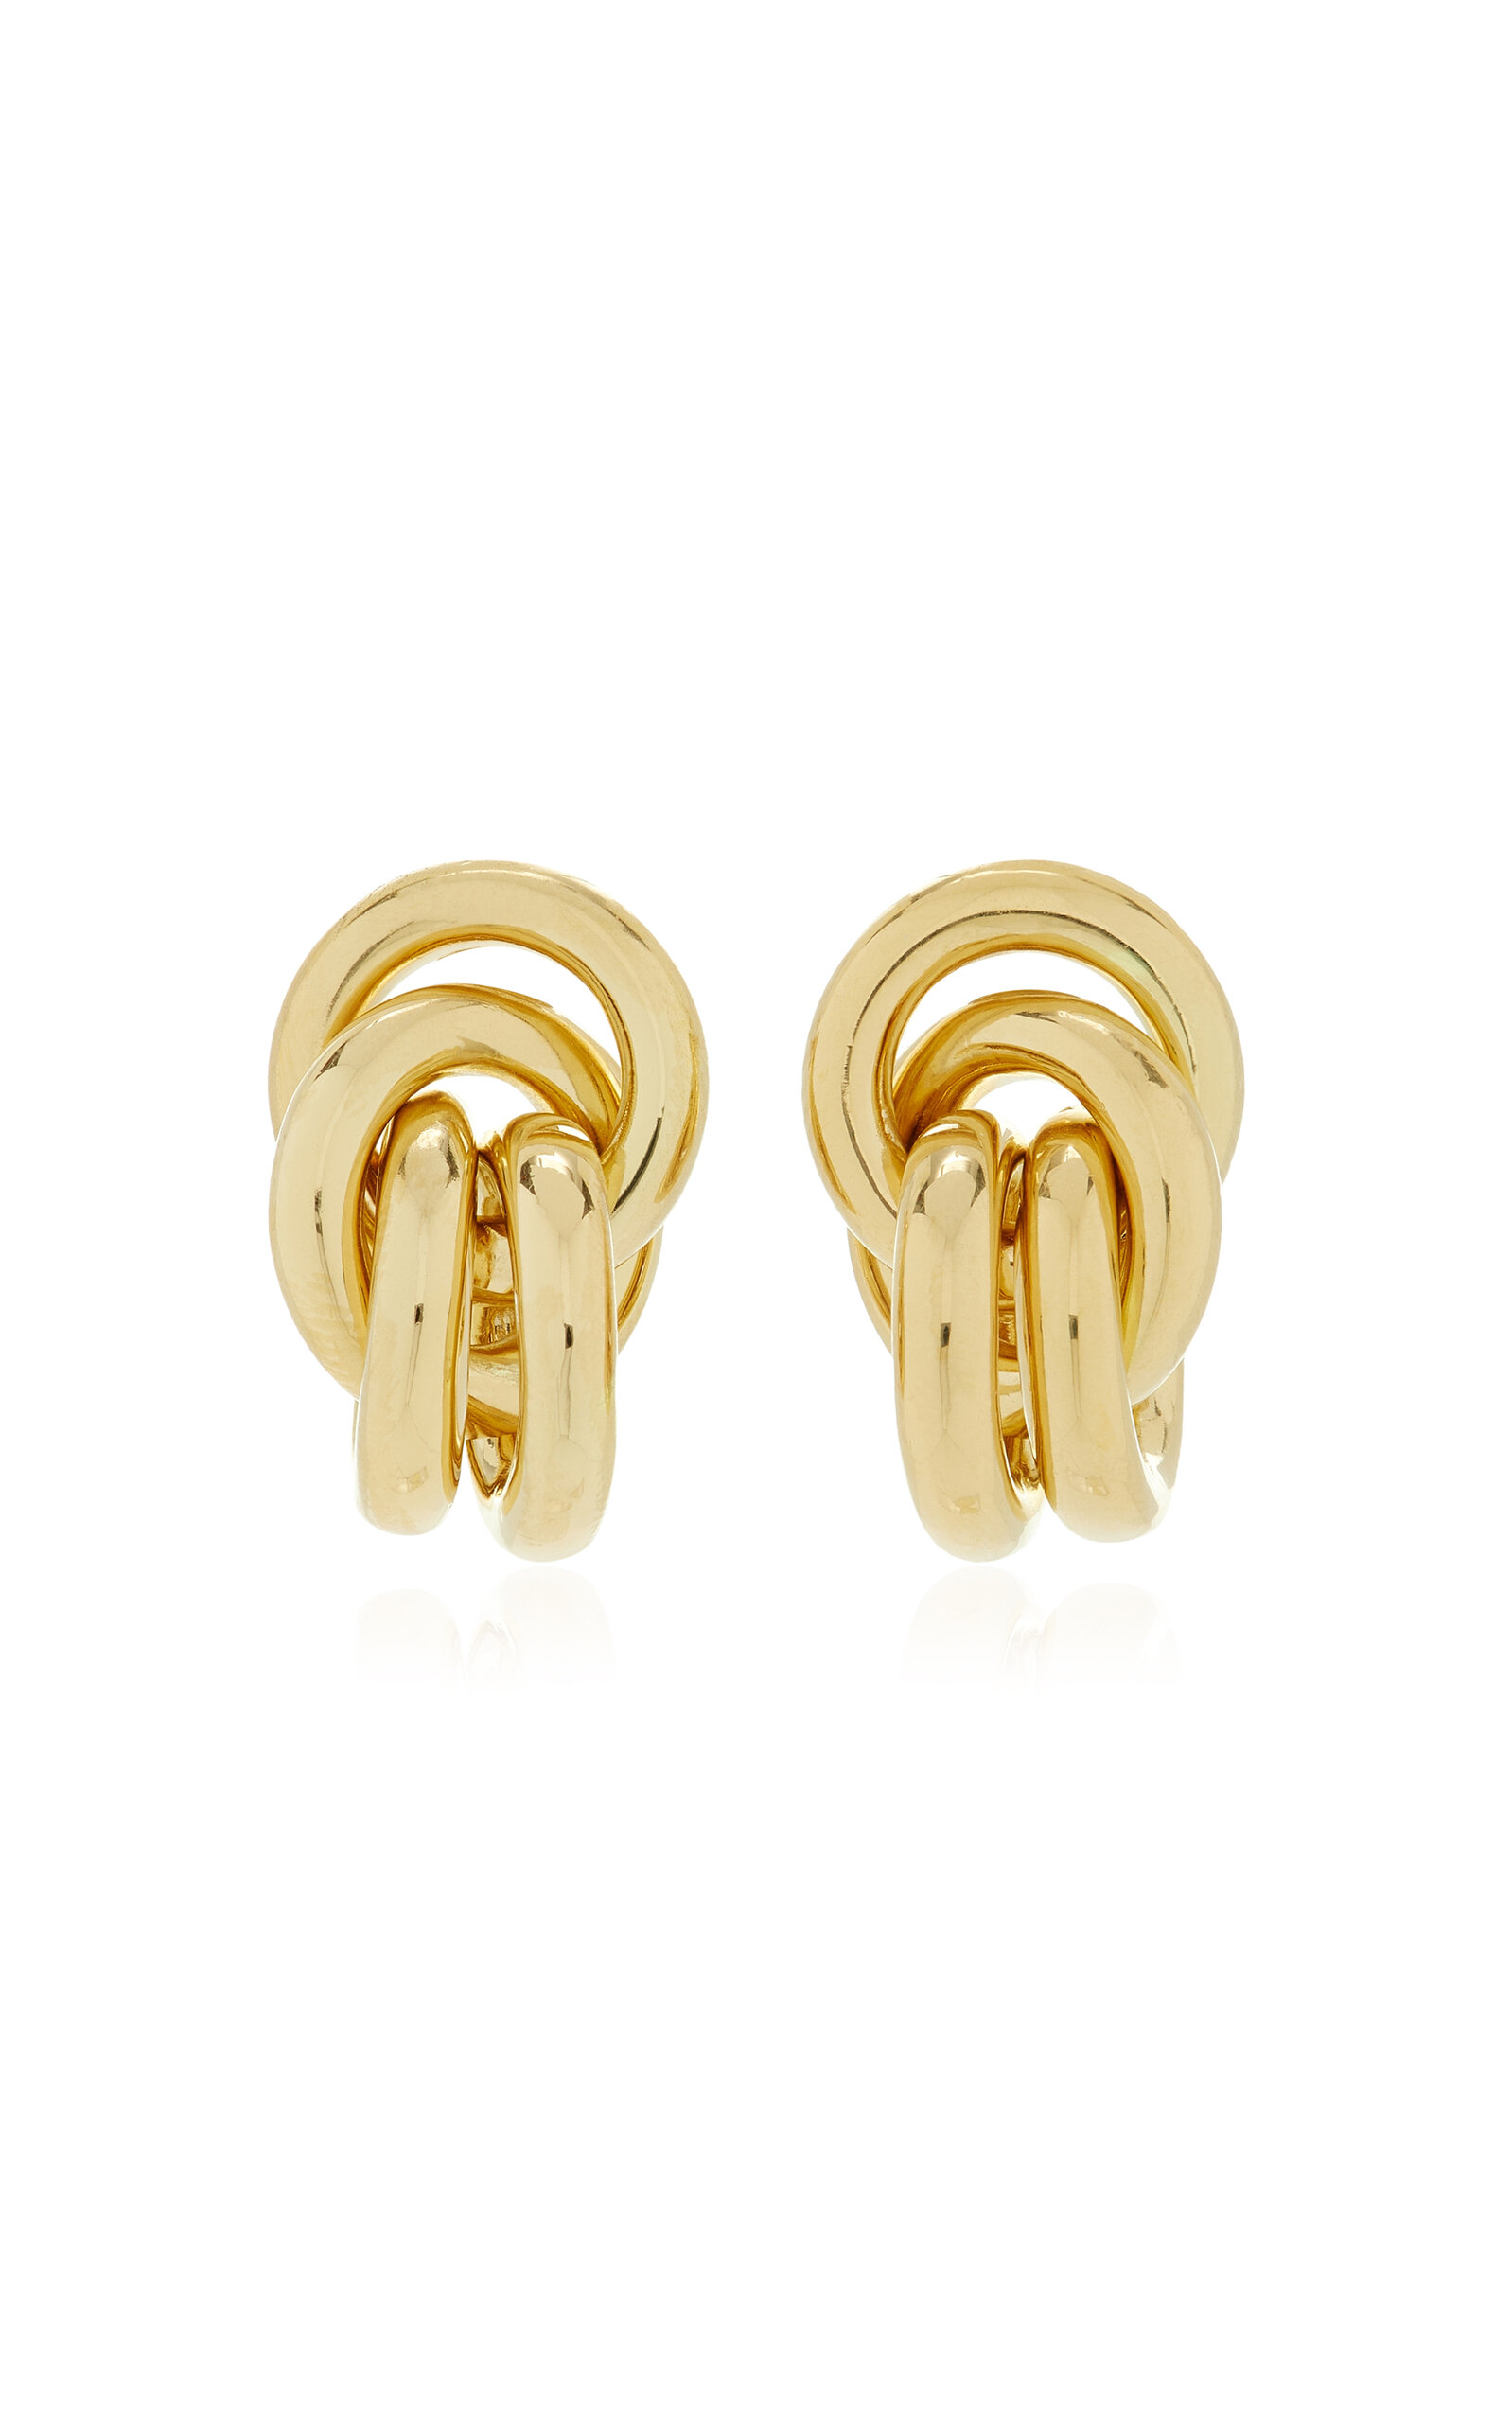 The Vera 18k Gold-Plated Earrings